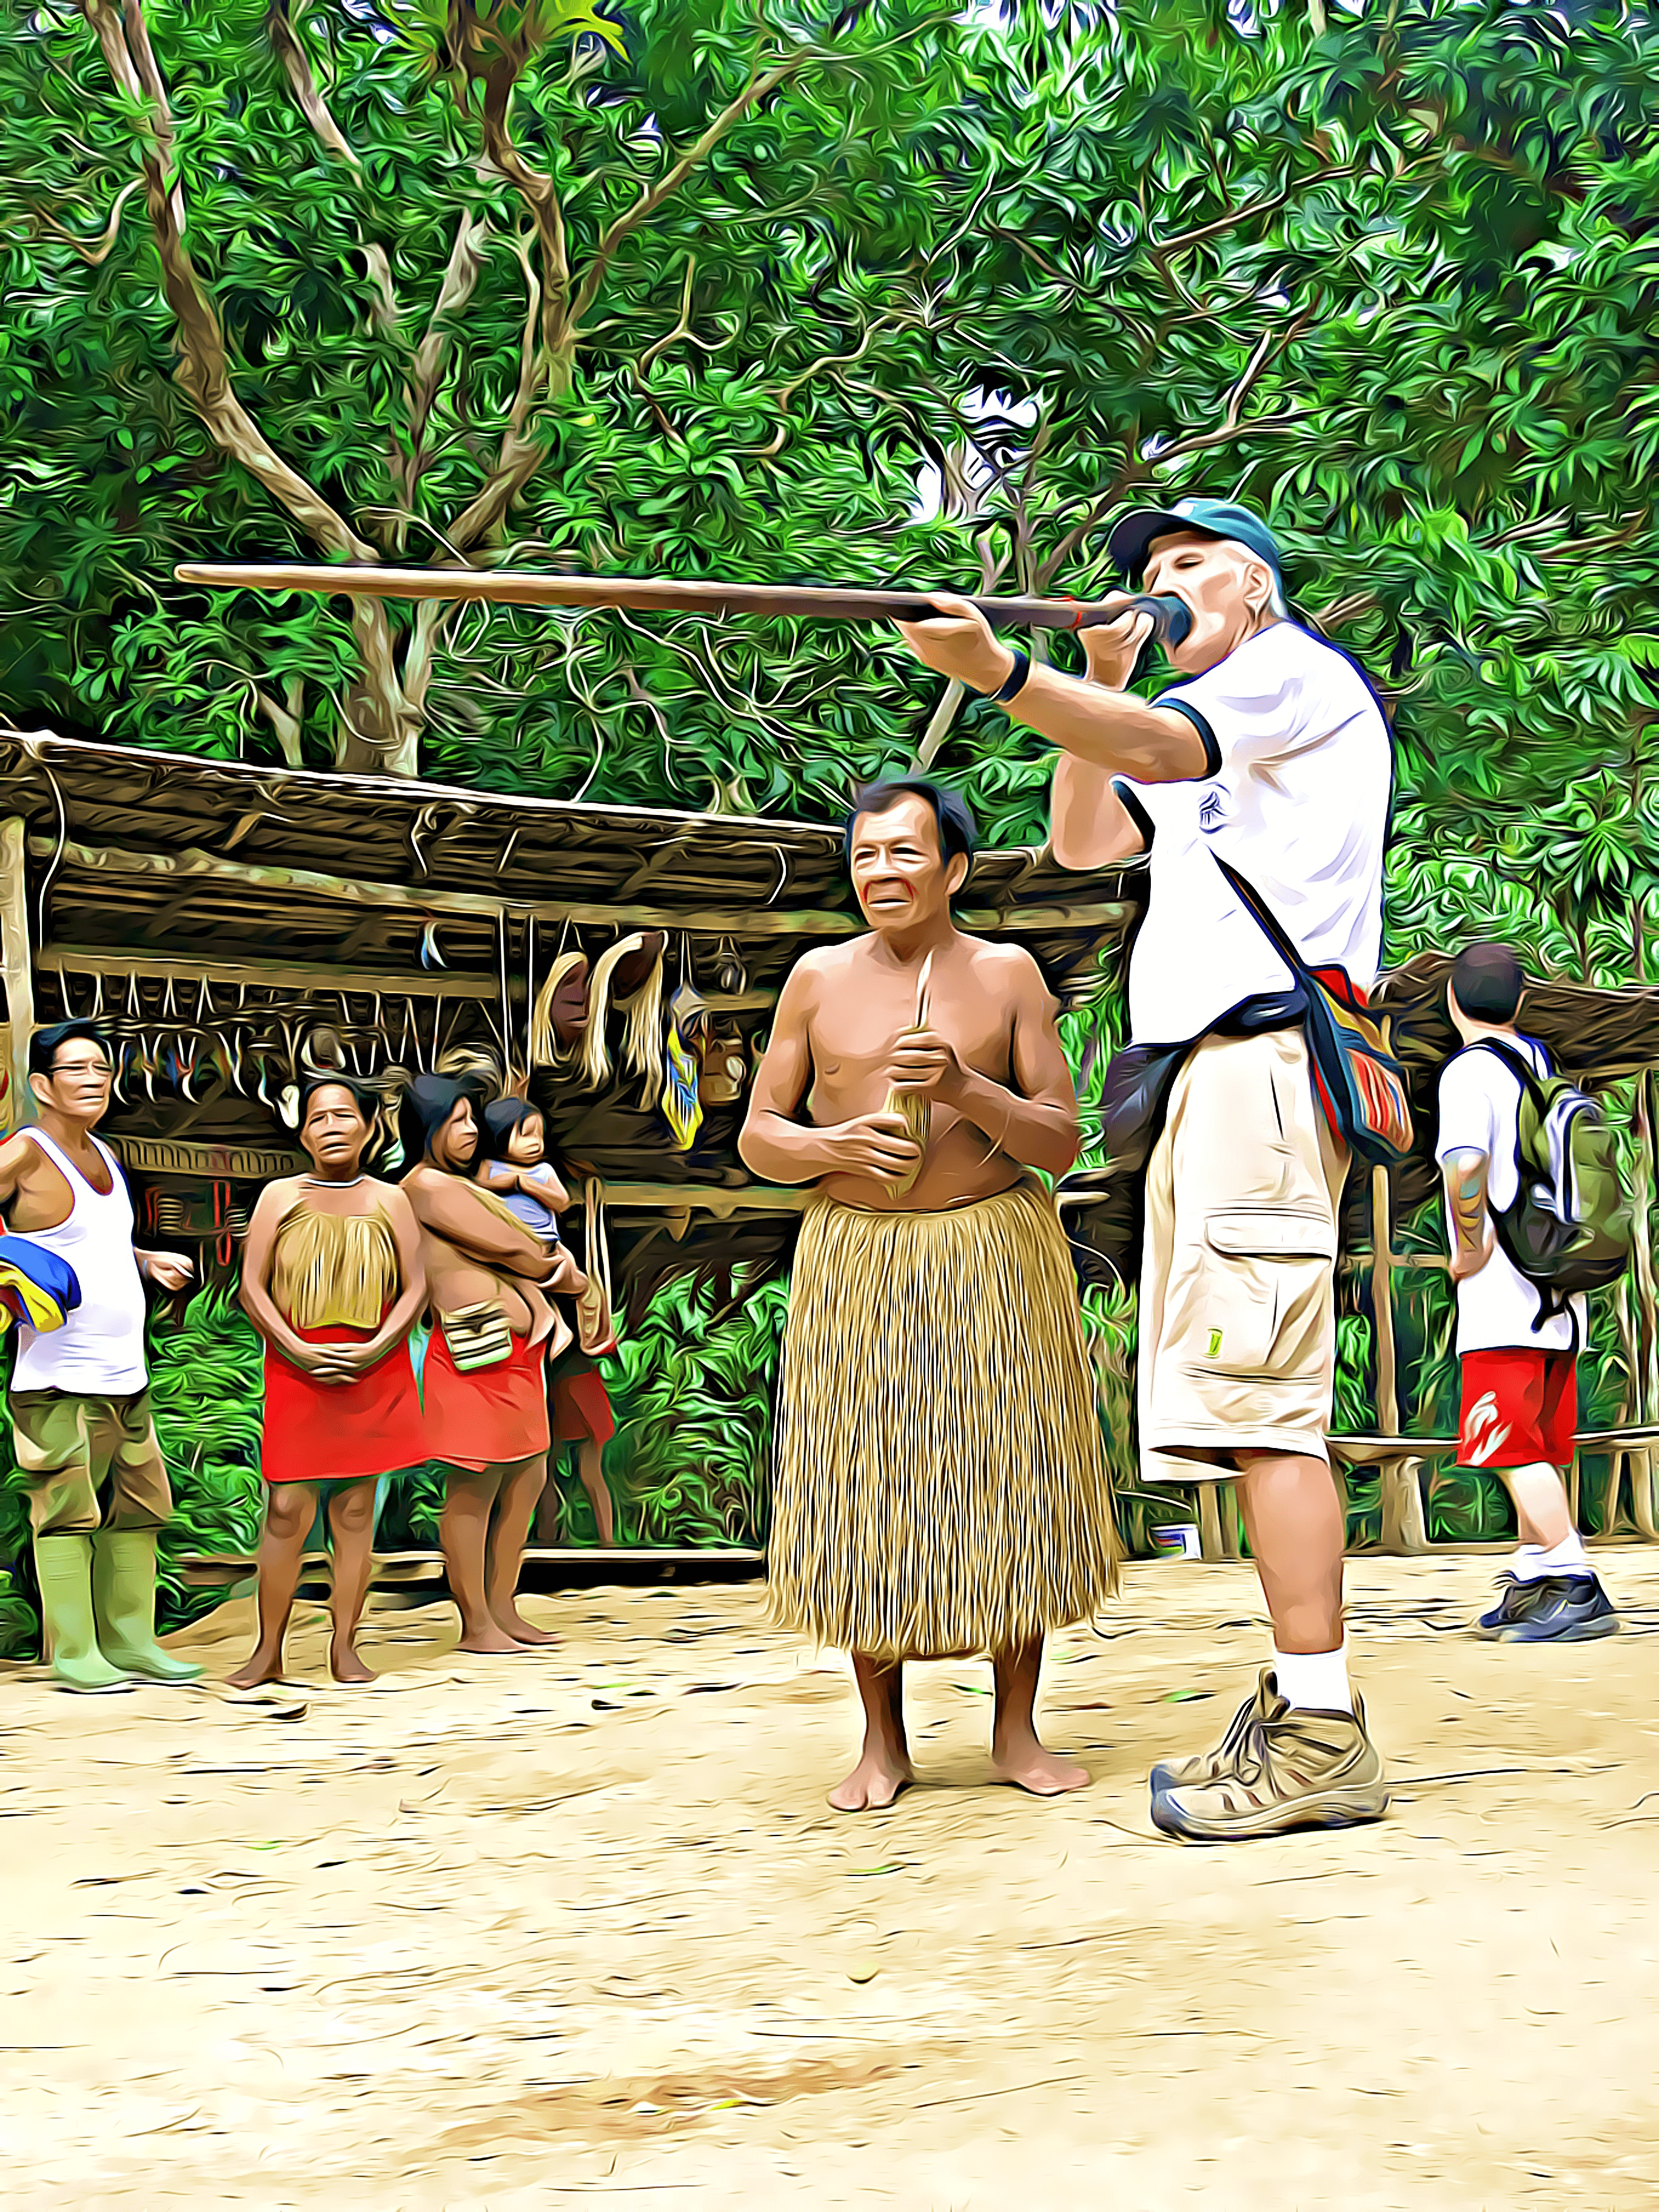 Howard Lawler Shooting Blowdarts with Bora Tribe in Iquitos Peru